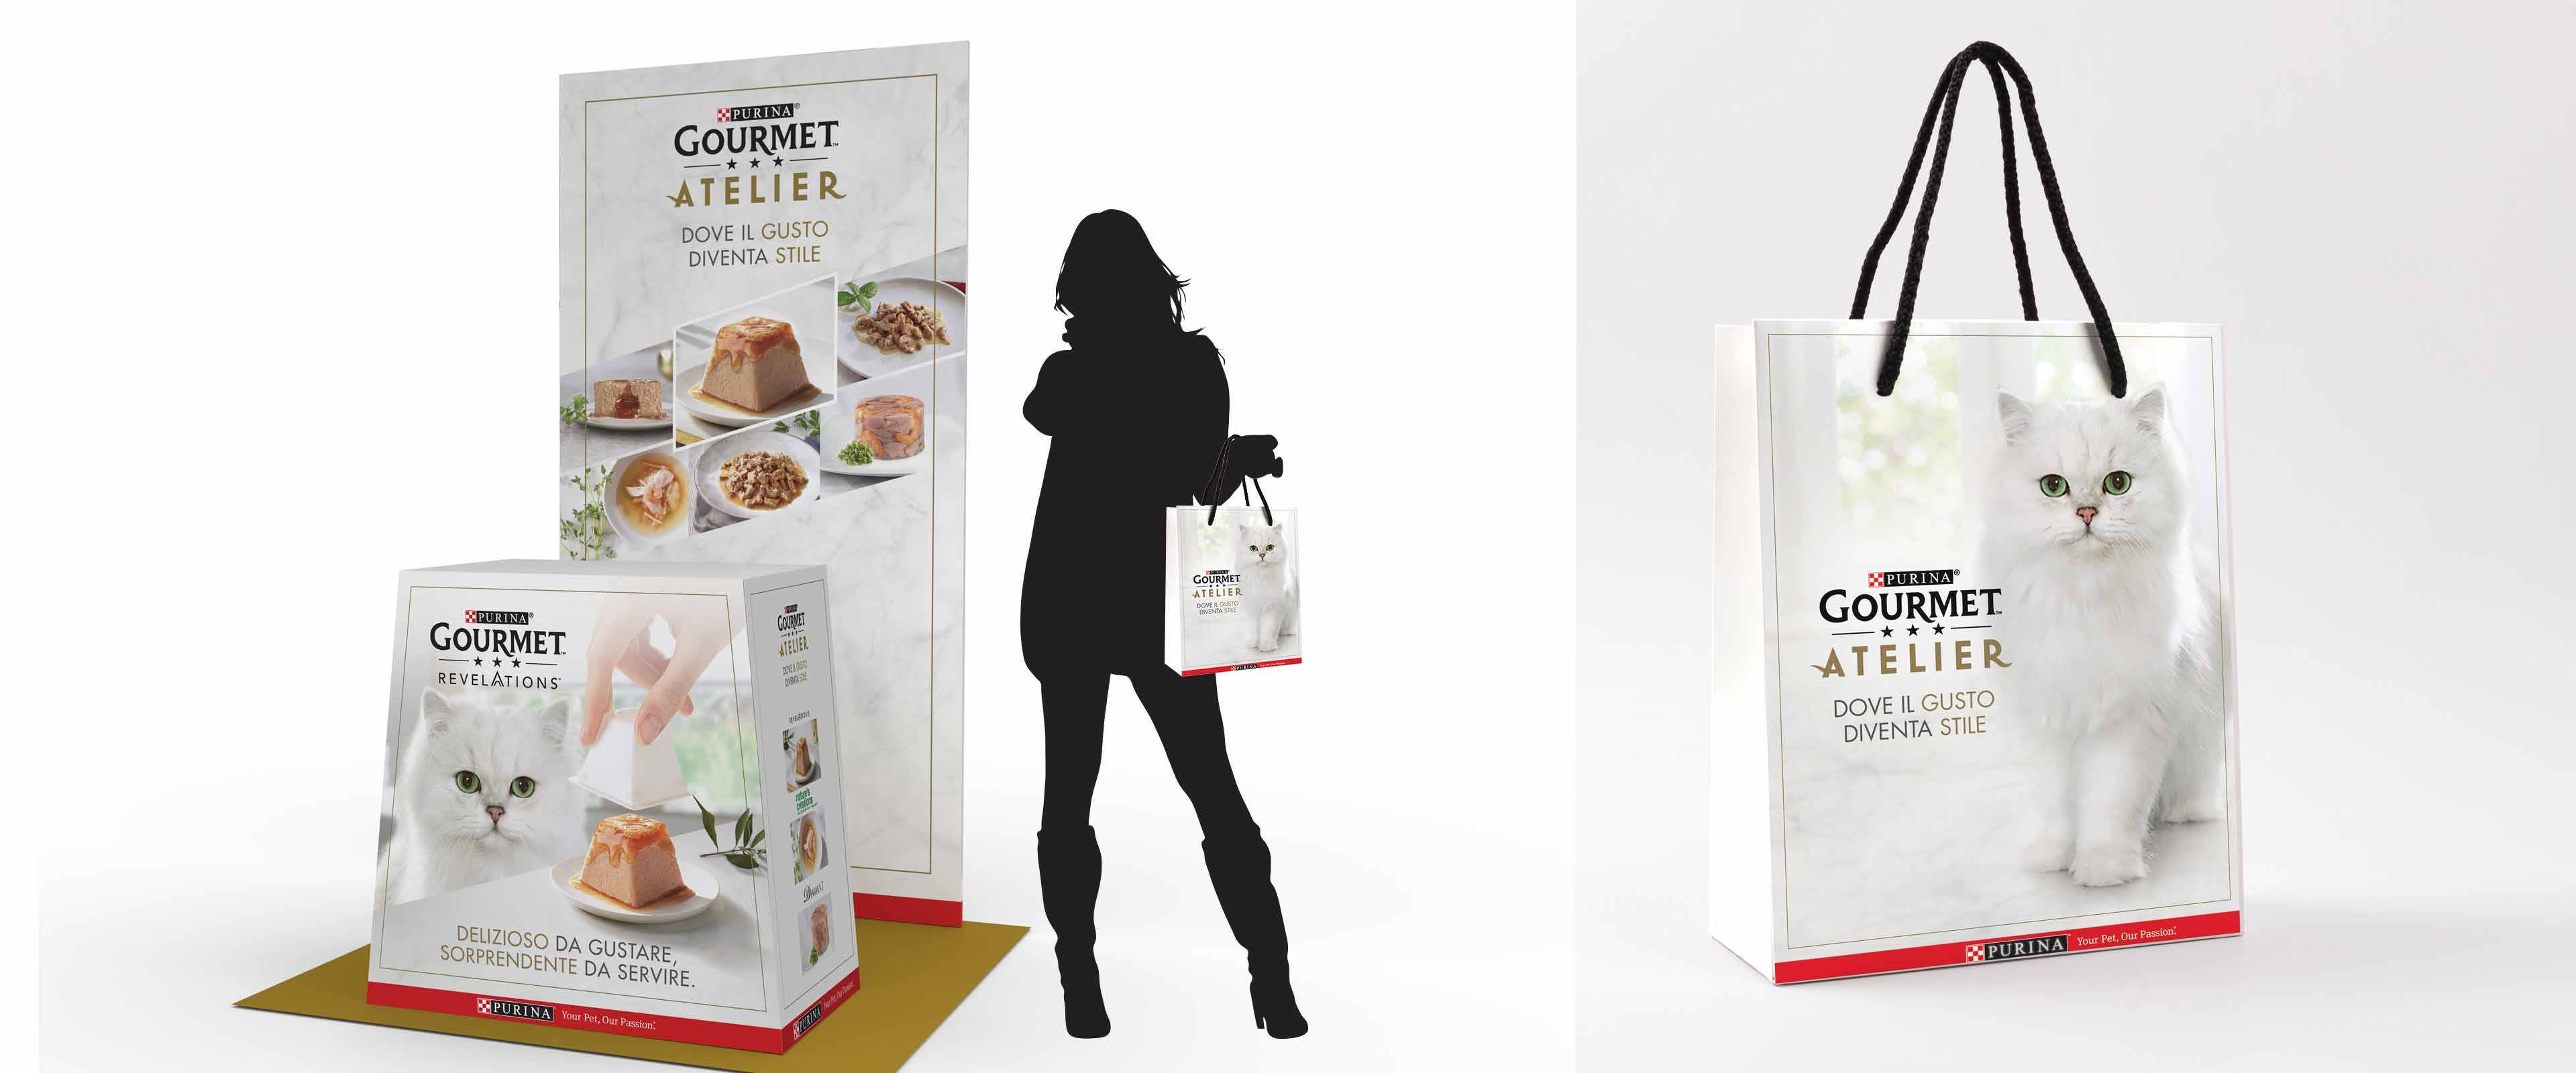 shop in the shop and shopper to present Gourmet Atelier concept